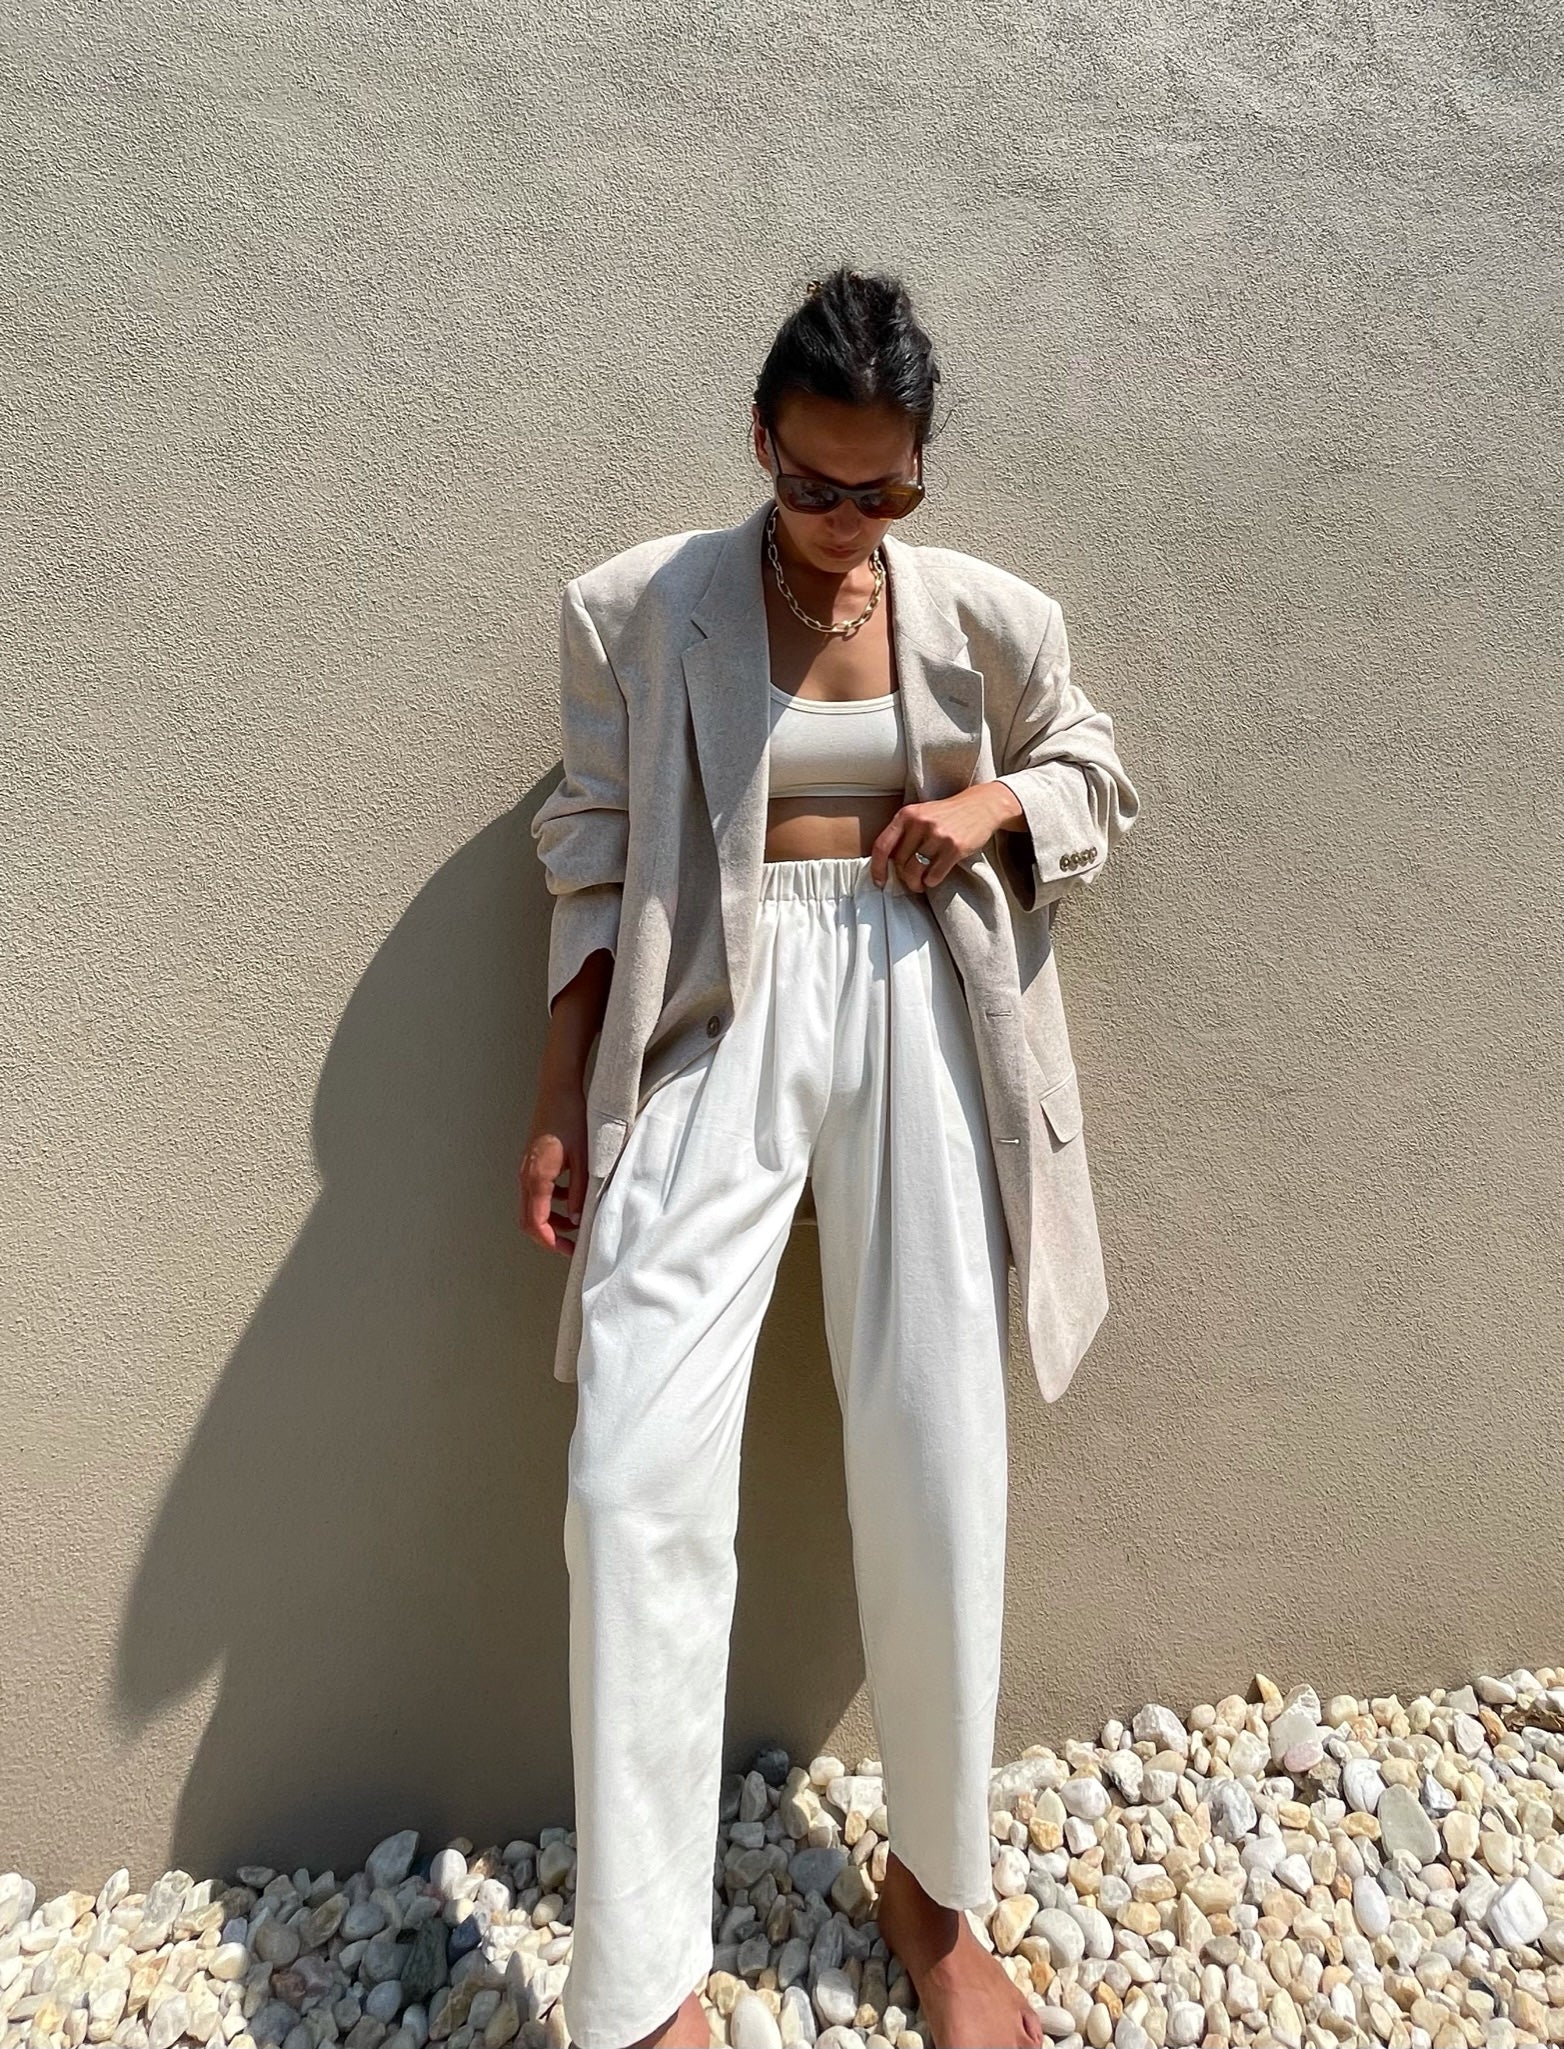 Effortlessly Chic: 11 Stylish Satin Pants Outfit Ideas